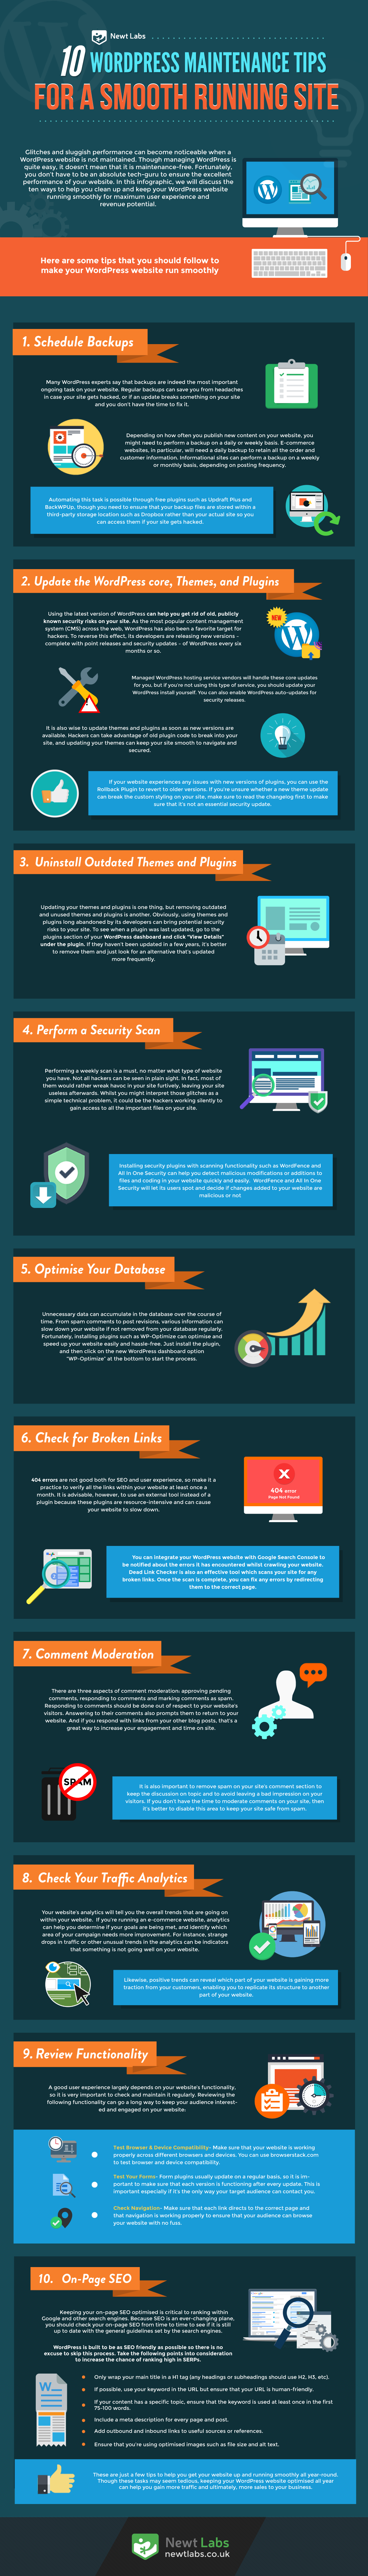 10 WordPress Maintenance Tips For A Smooth Running Site - #Infographic